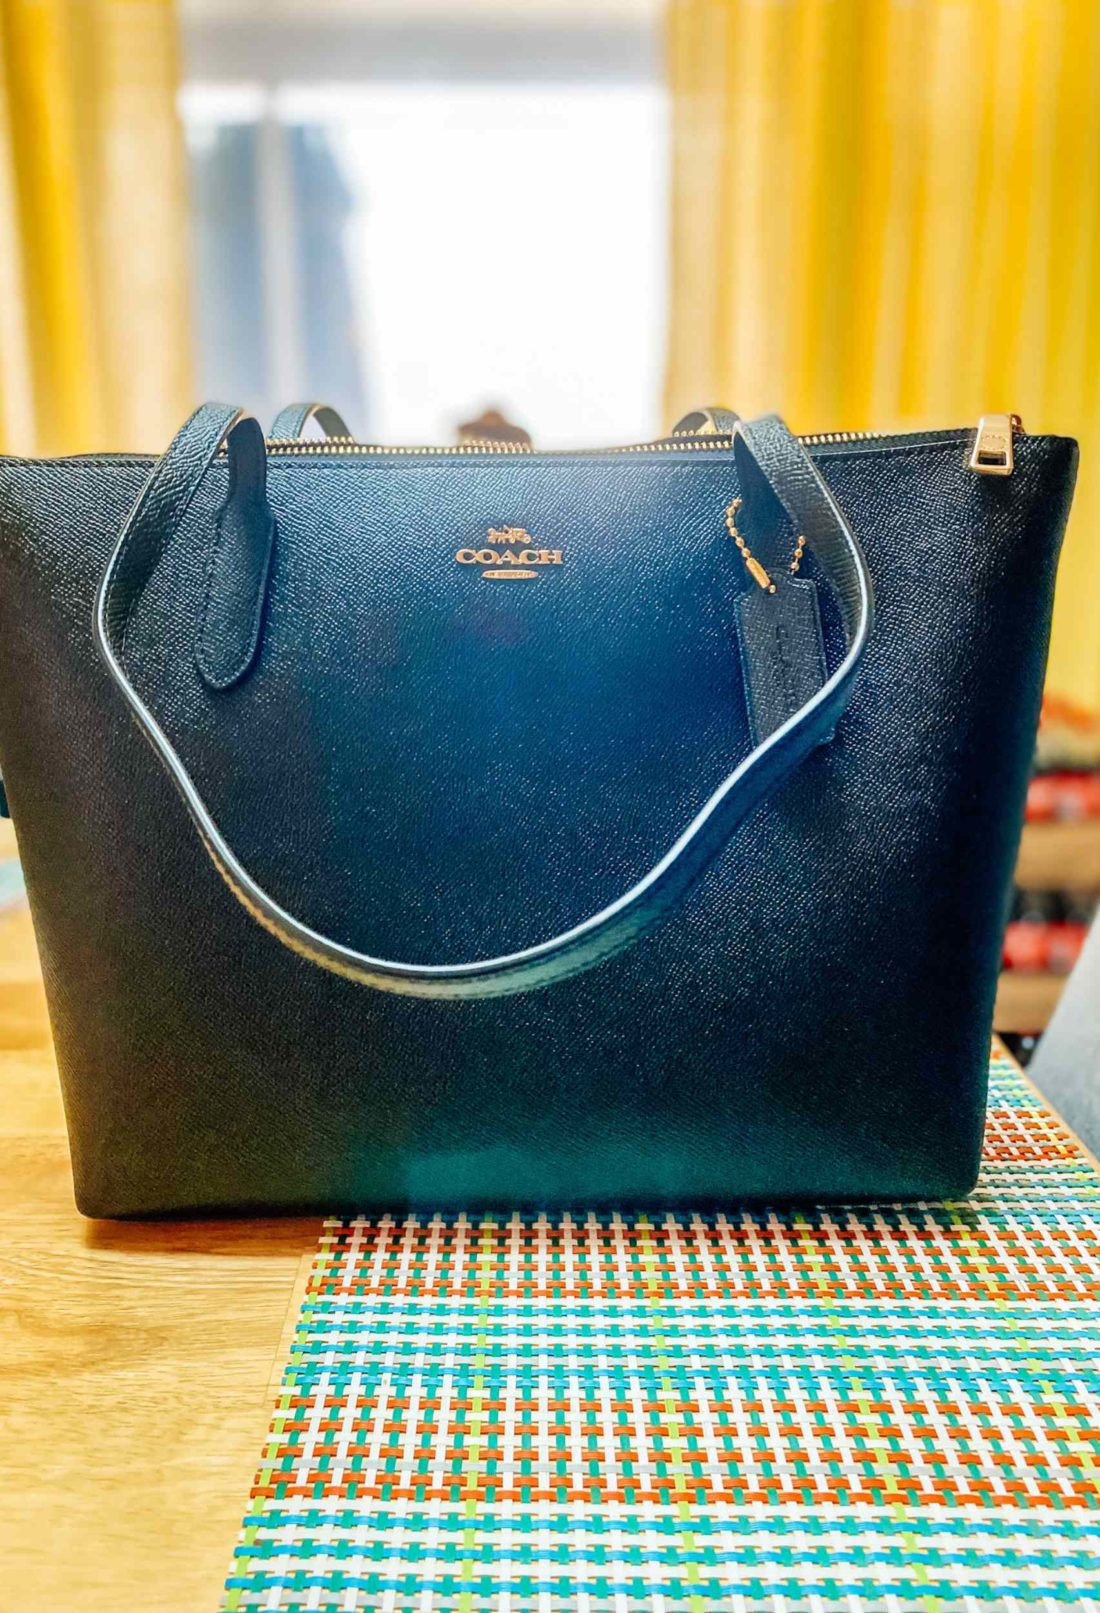 The Ultimate Guide to Coach Bags - FARFETCH